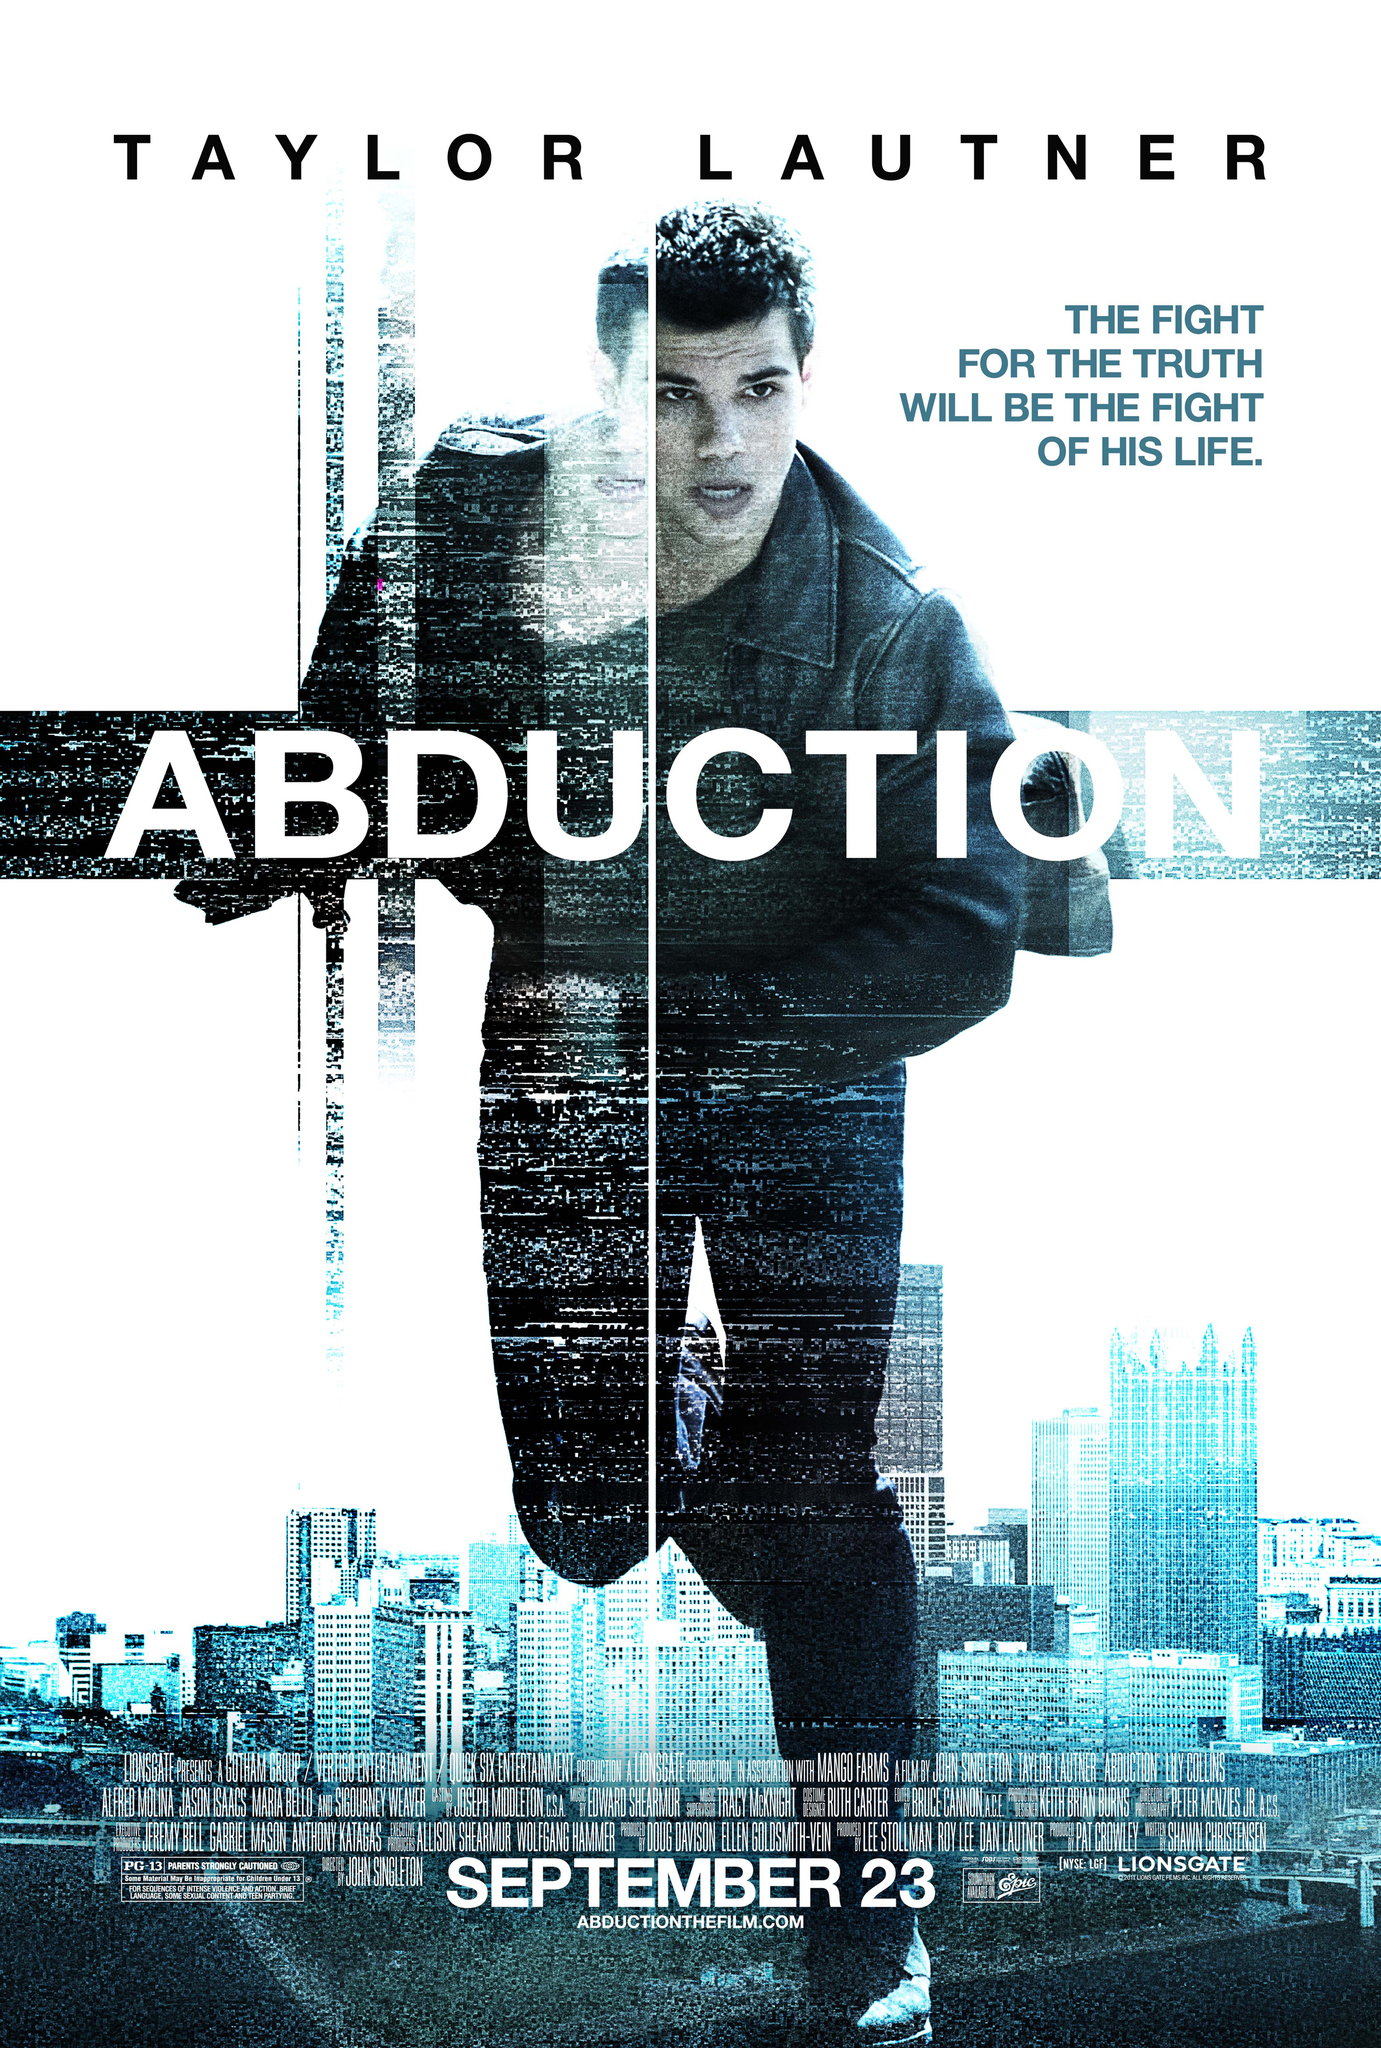 Nathan, a young man, learns that he was abducted as a child. But before he can confront his adoptive parents, they are shot dead by mysterious men who are now out to track him down.